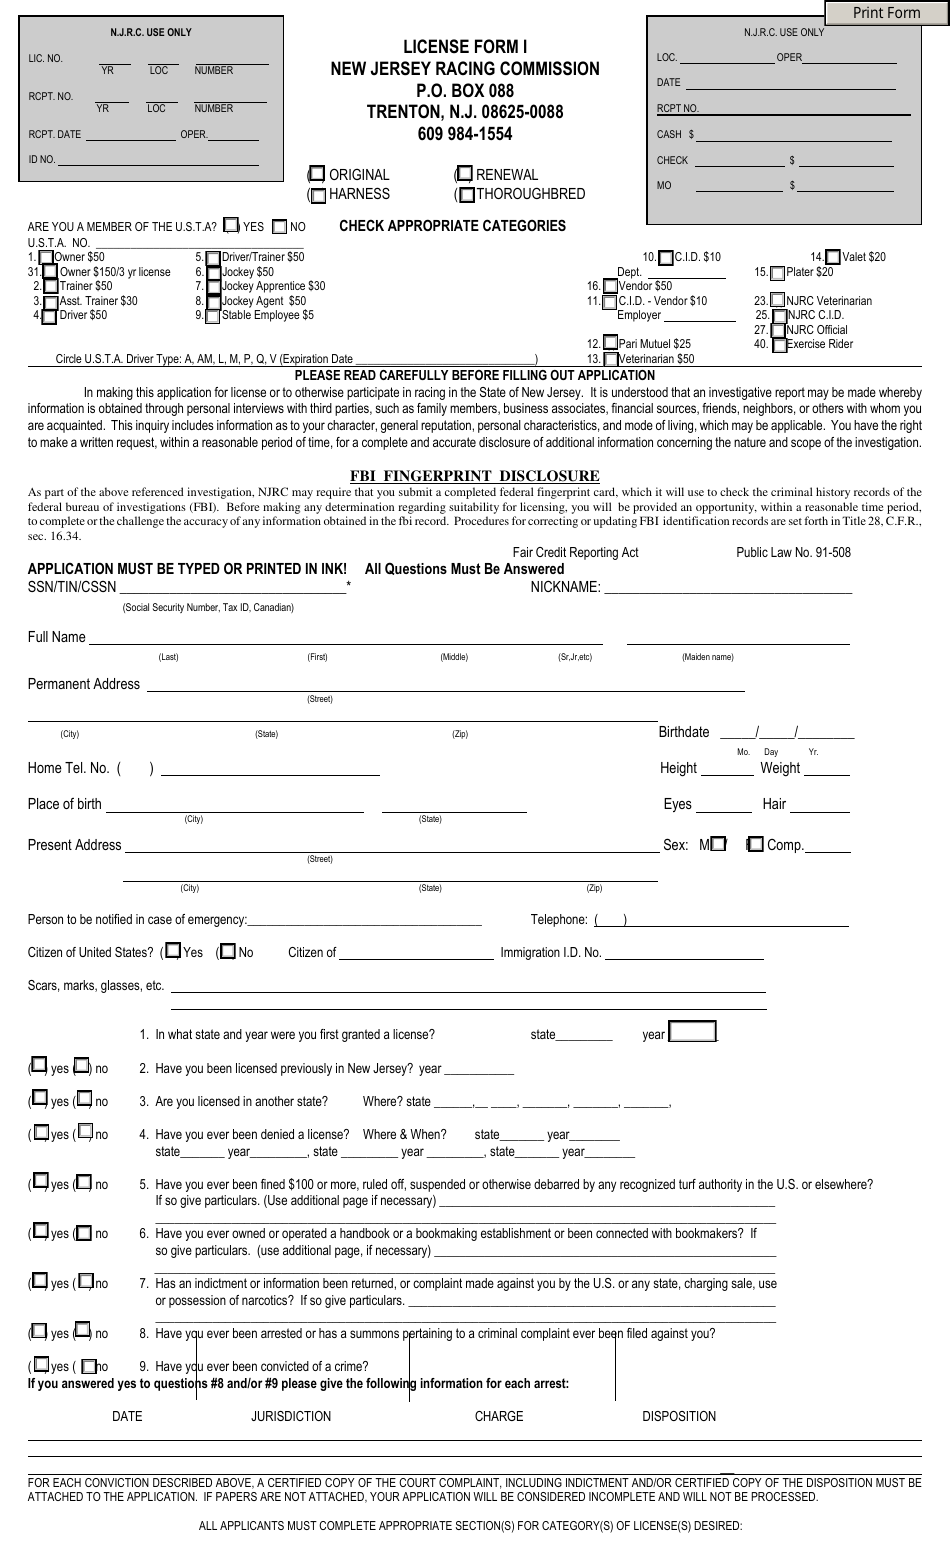 Licensing Form I Application - New Jersey, Page 1